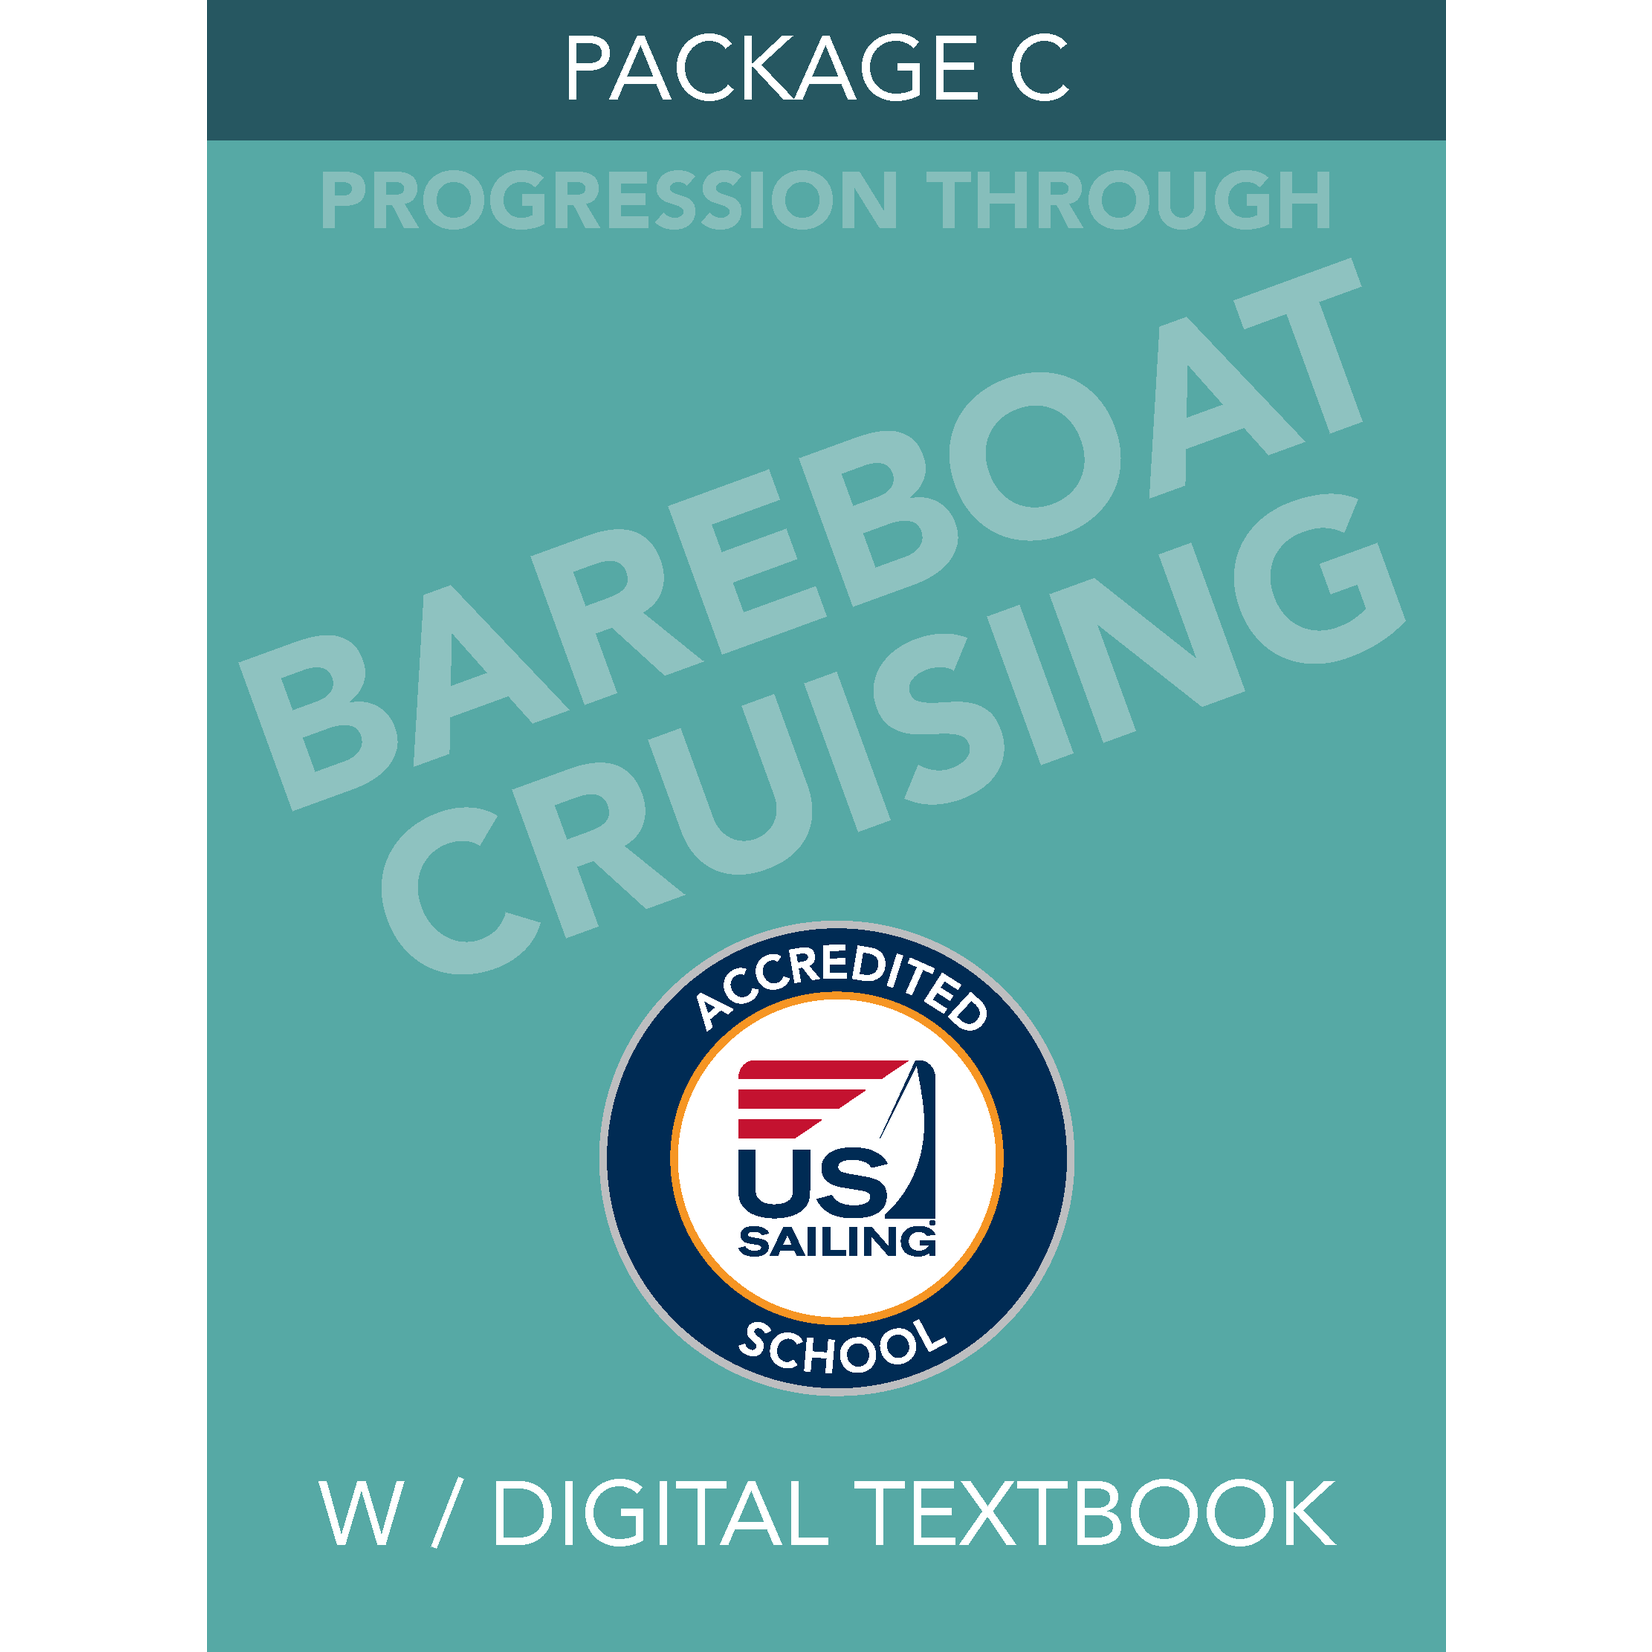 PACKAGE Package C- Bareboat Cruising with Digital Textbook